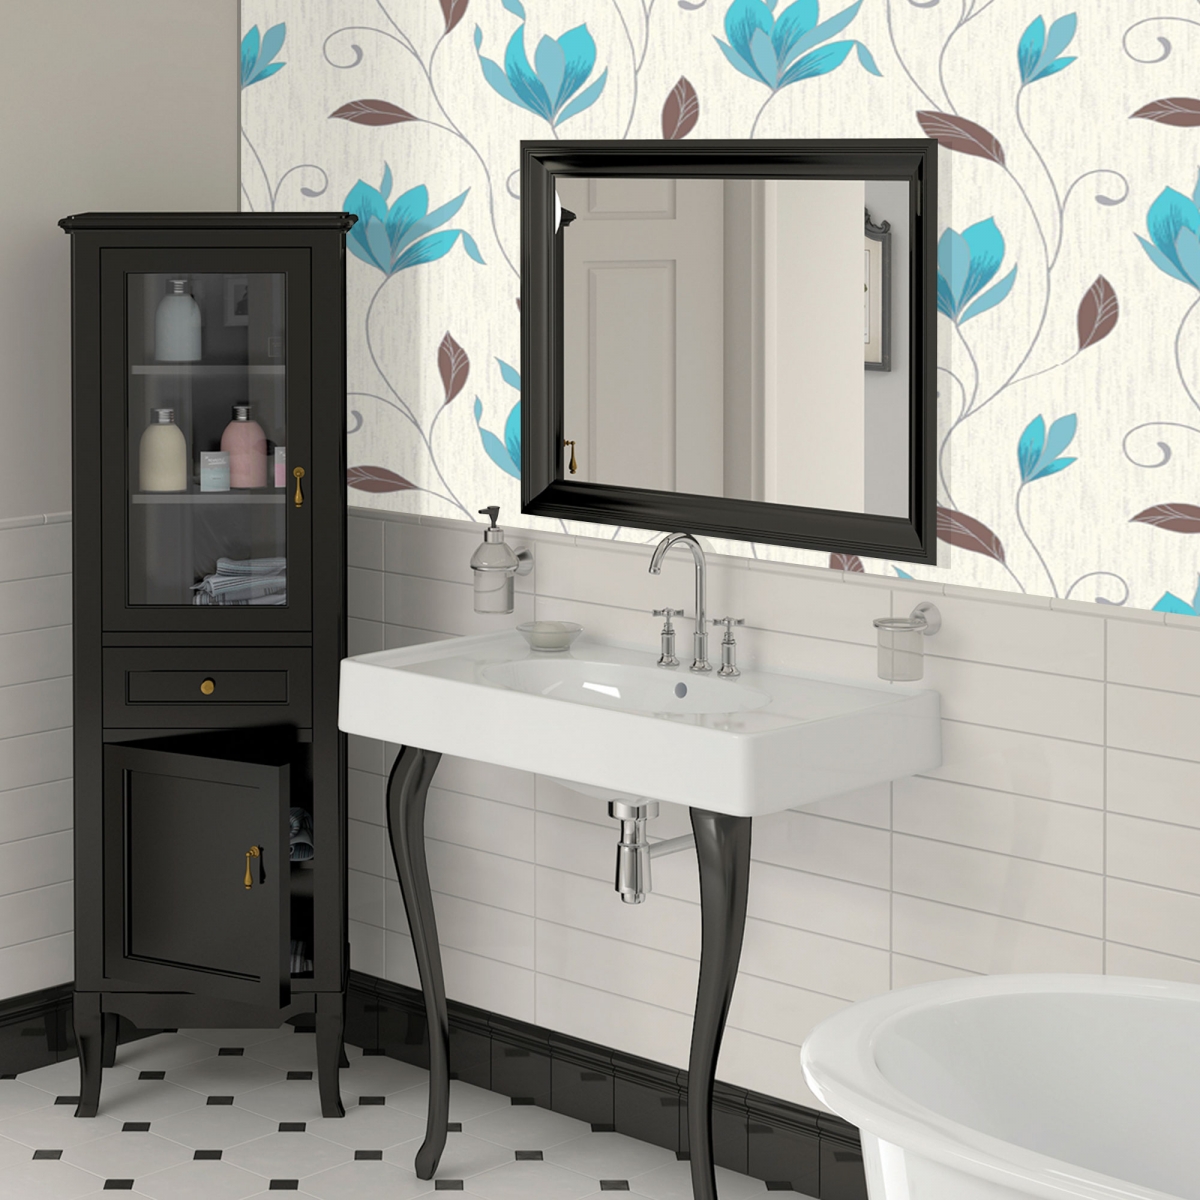  Shop By Style Floral Synergy Teal and Brown Floral Wallpaper